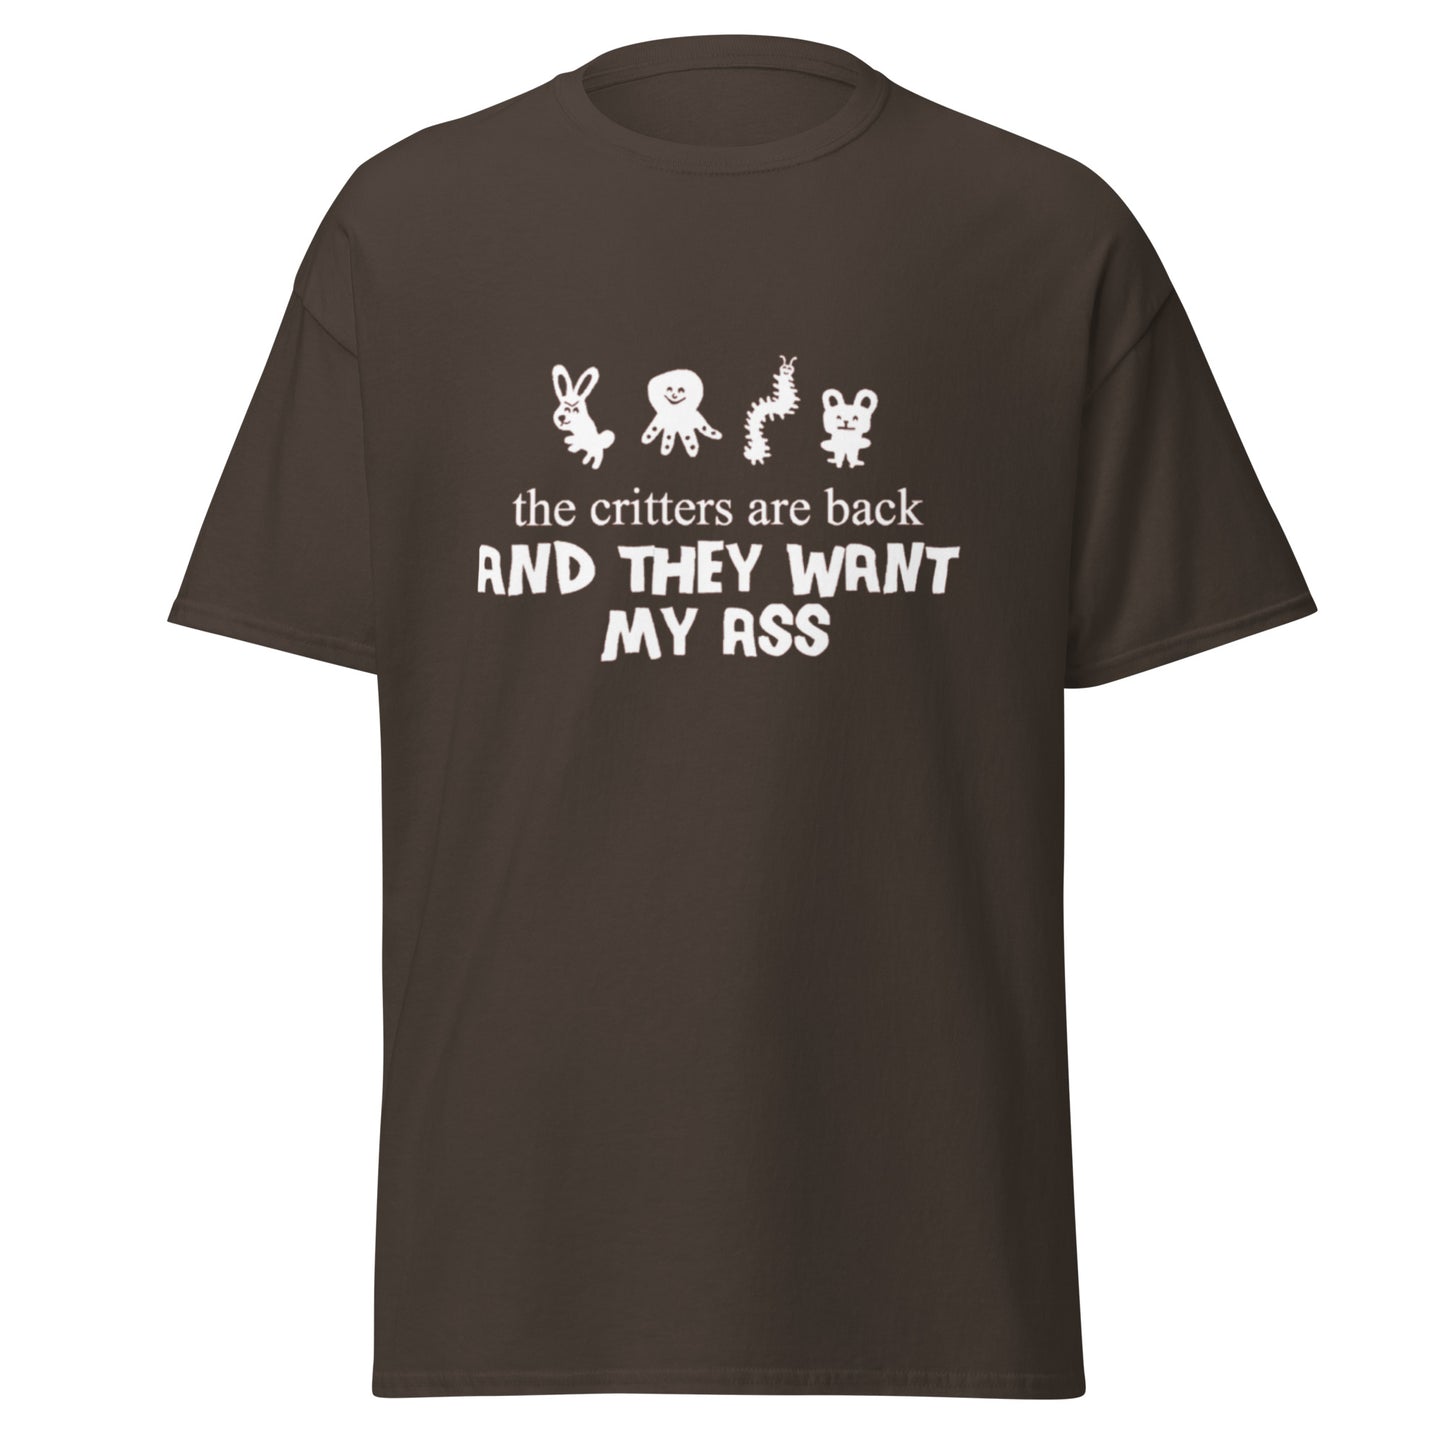 THE CRITTERS ARE BACK AND THEY WANT MY ASS TEE